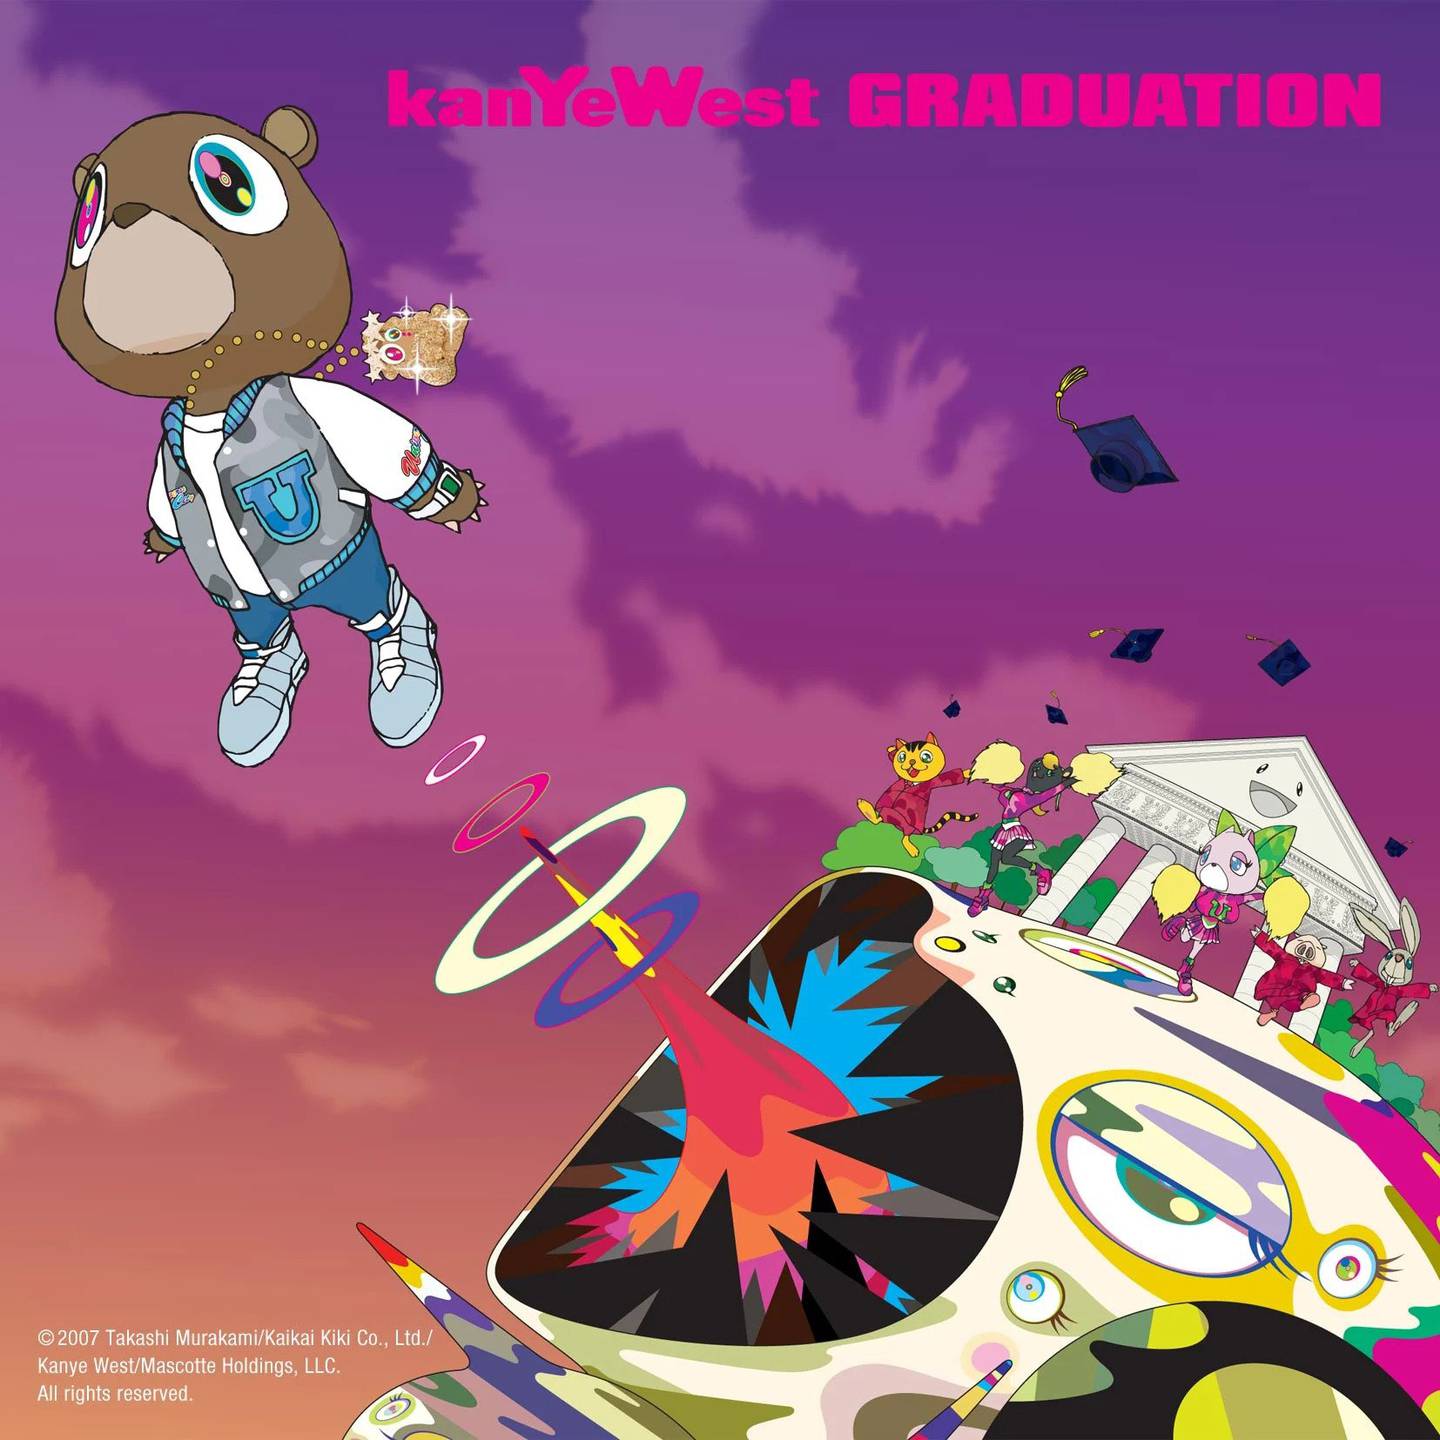 Among the artist's most recognisable collaborations was his artwork for Kanye West's 2007 album Graduation. Photo: Roc-A-Fella and Def Jam